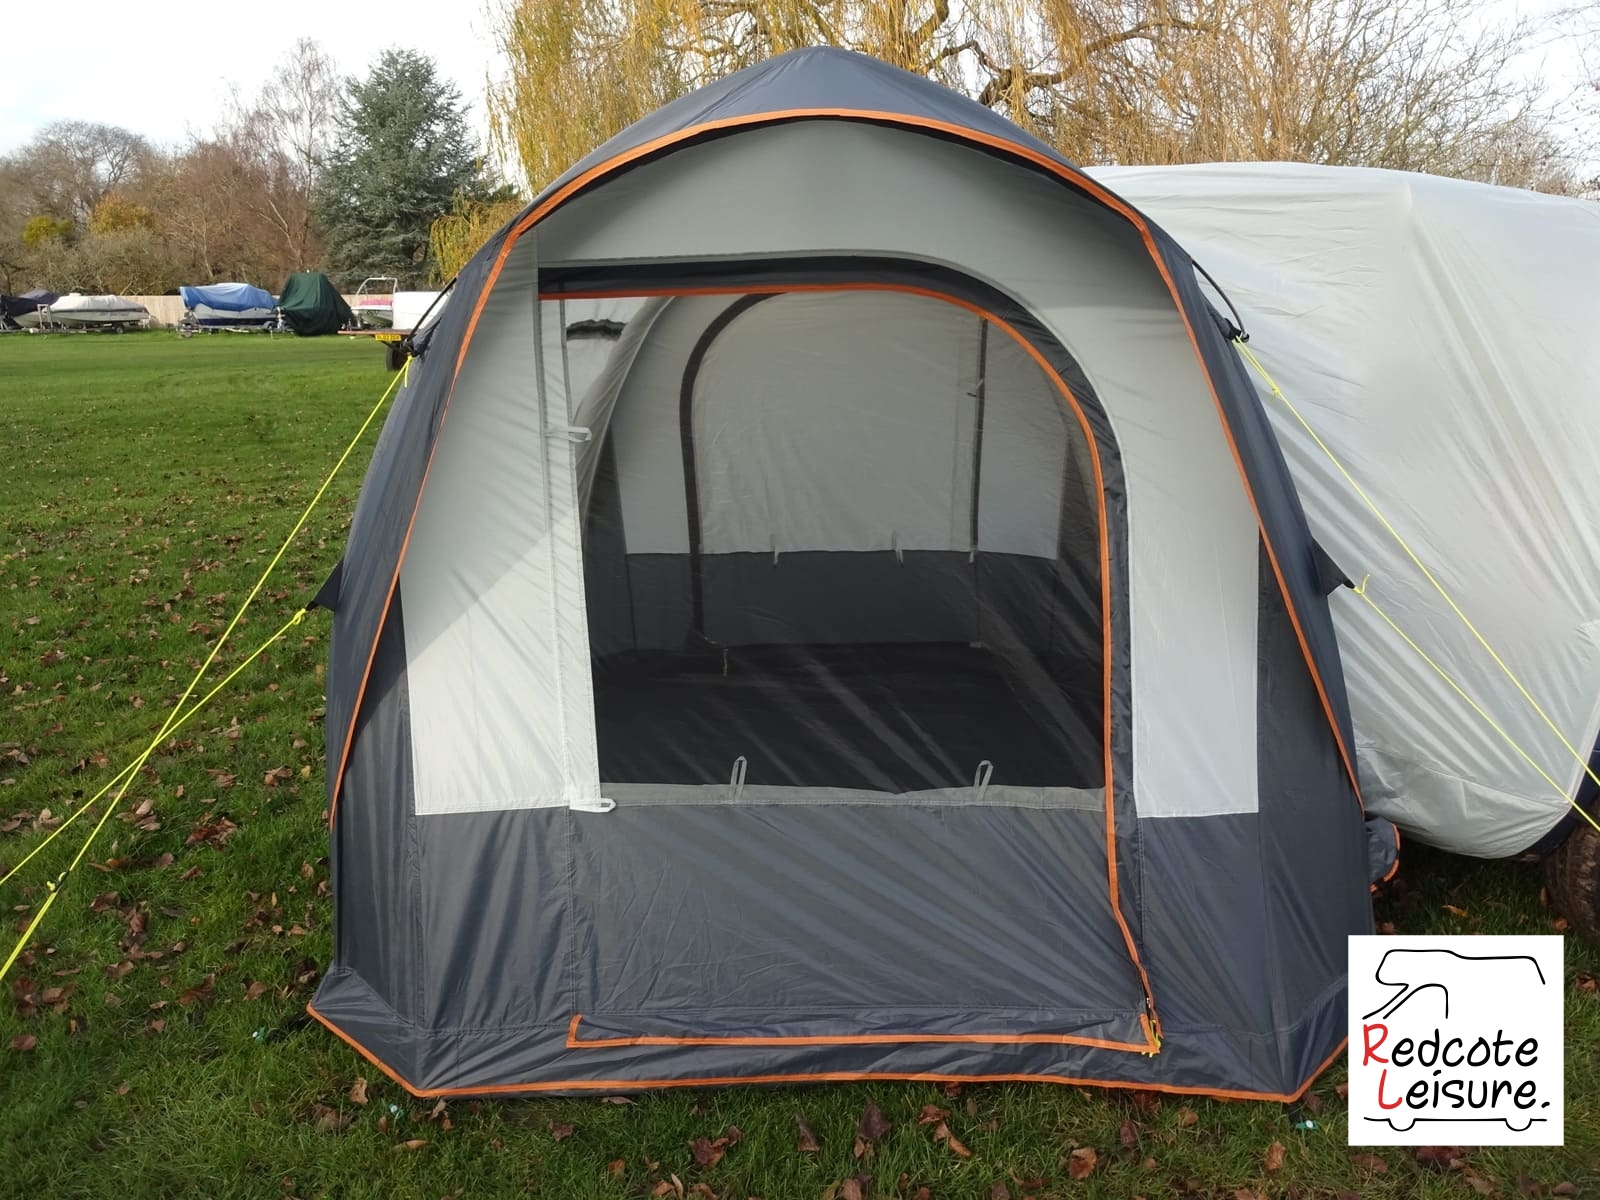 Redcote Leisure Adventurer Air Rear Tailgate Micro Camper Awning